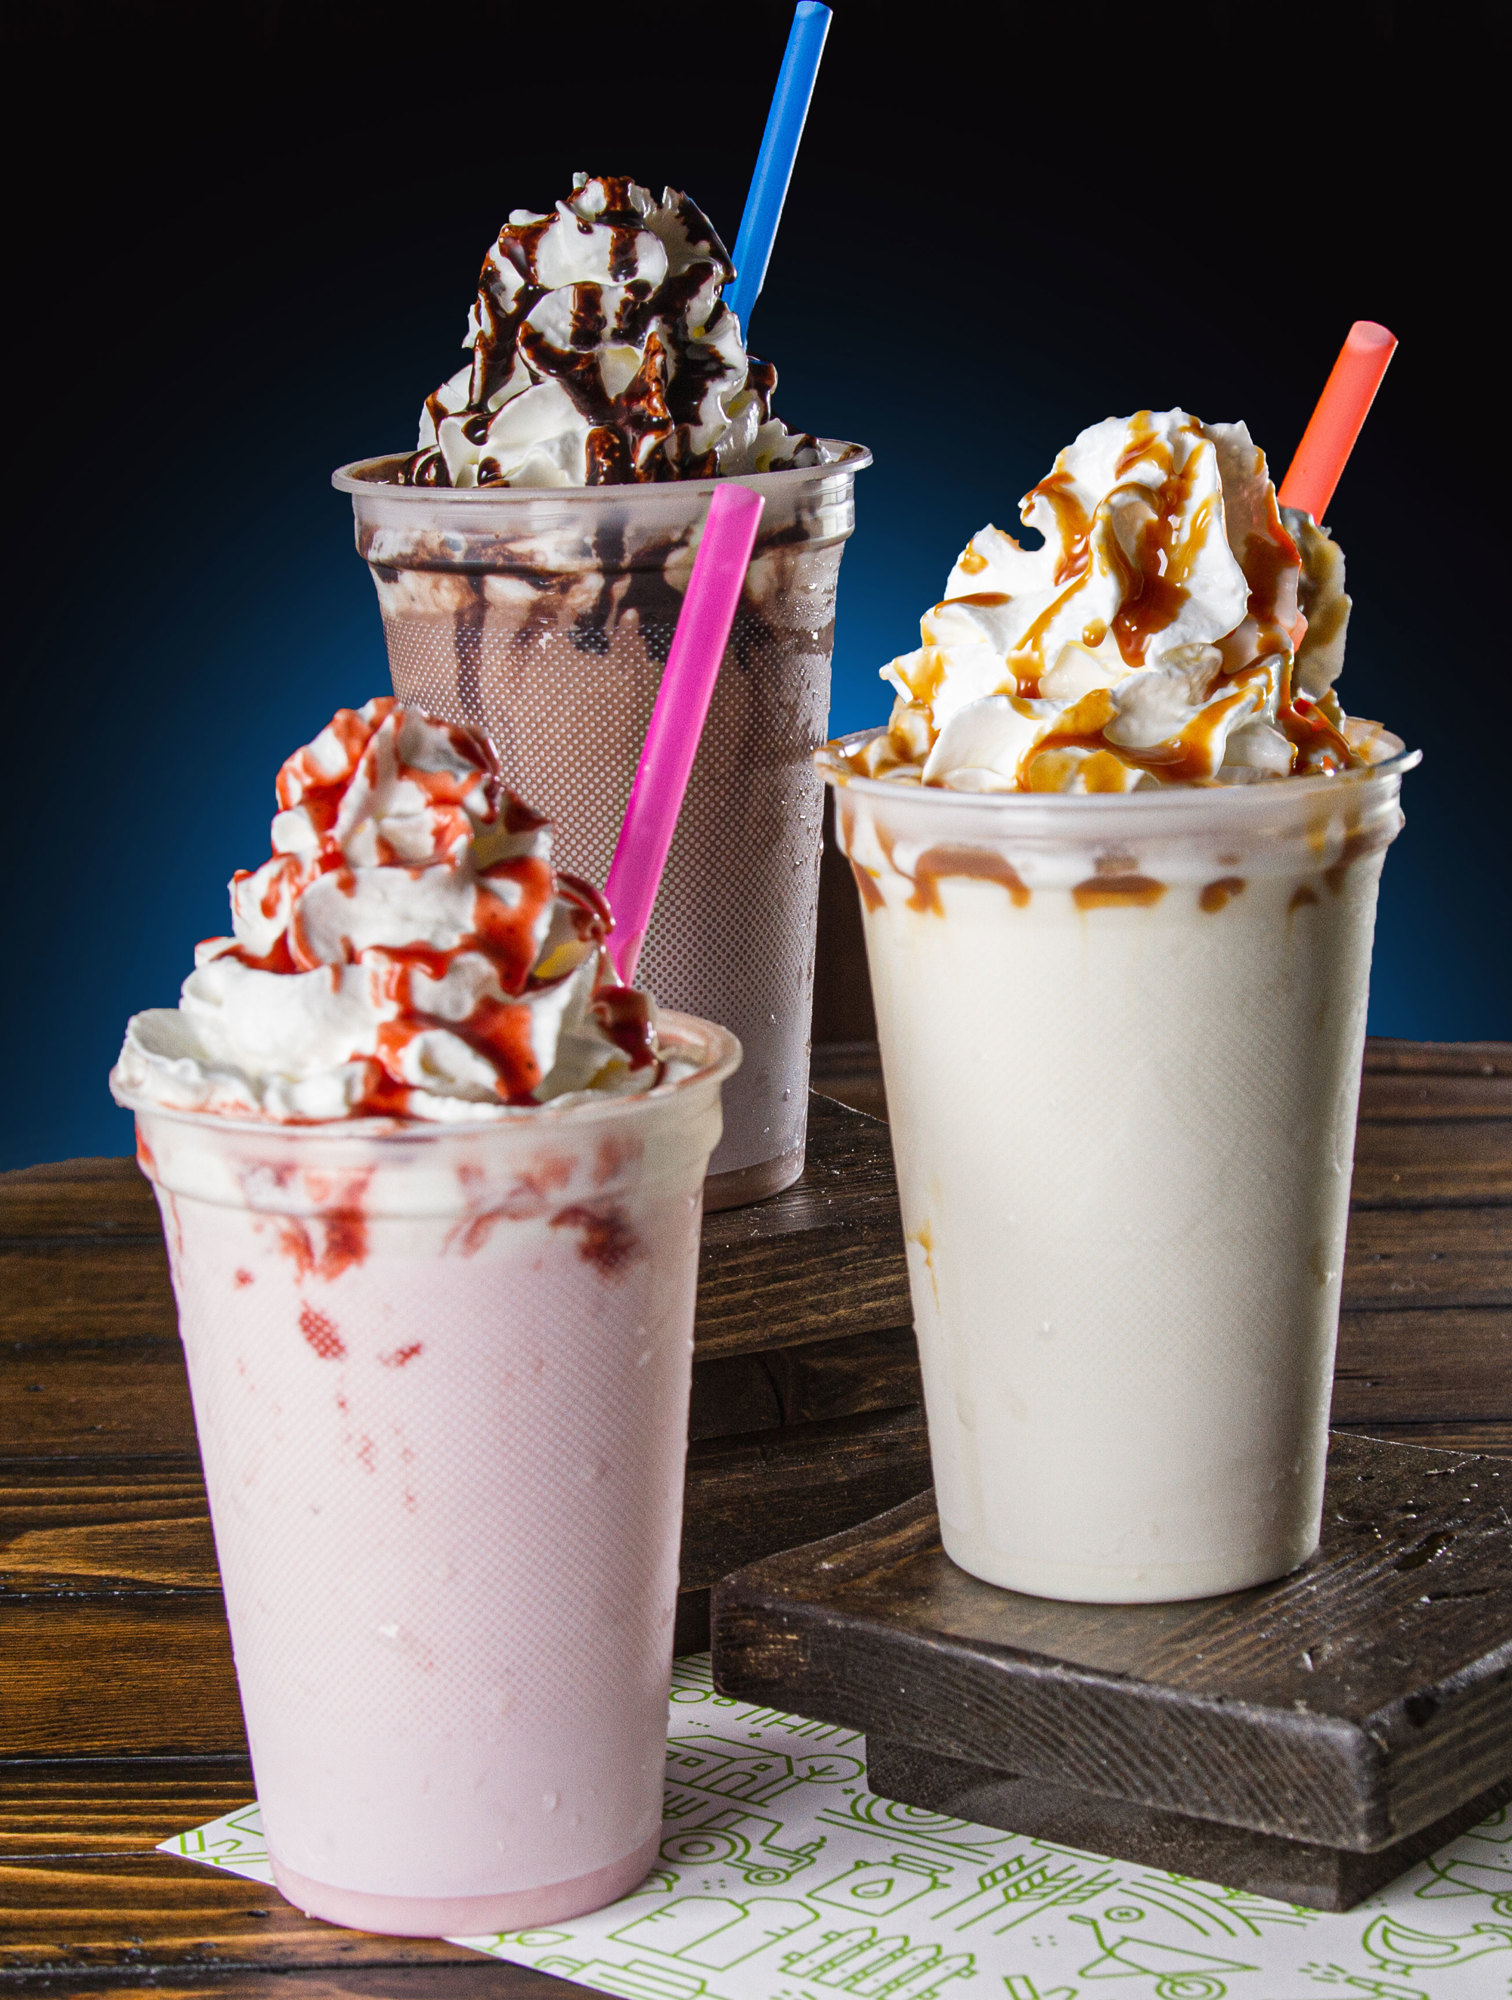 Courtesy. Milkshakes will also be a big part of The Hatchery's menu.